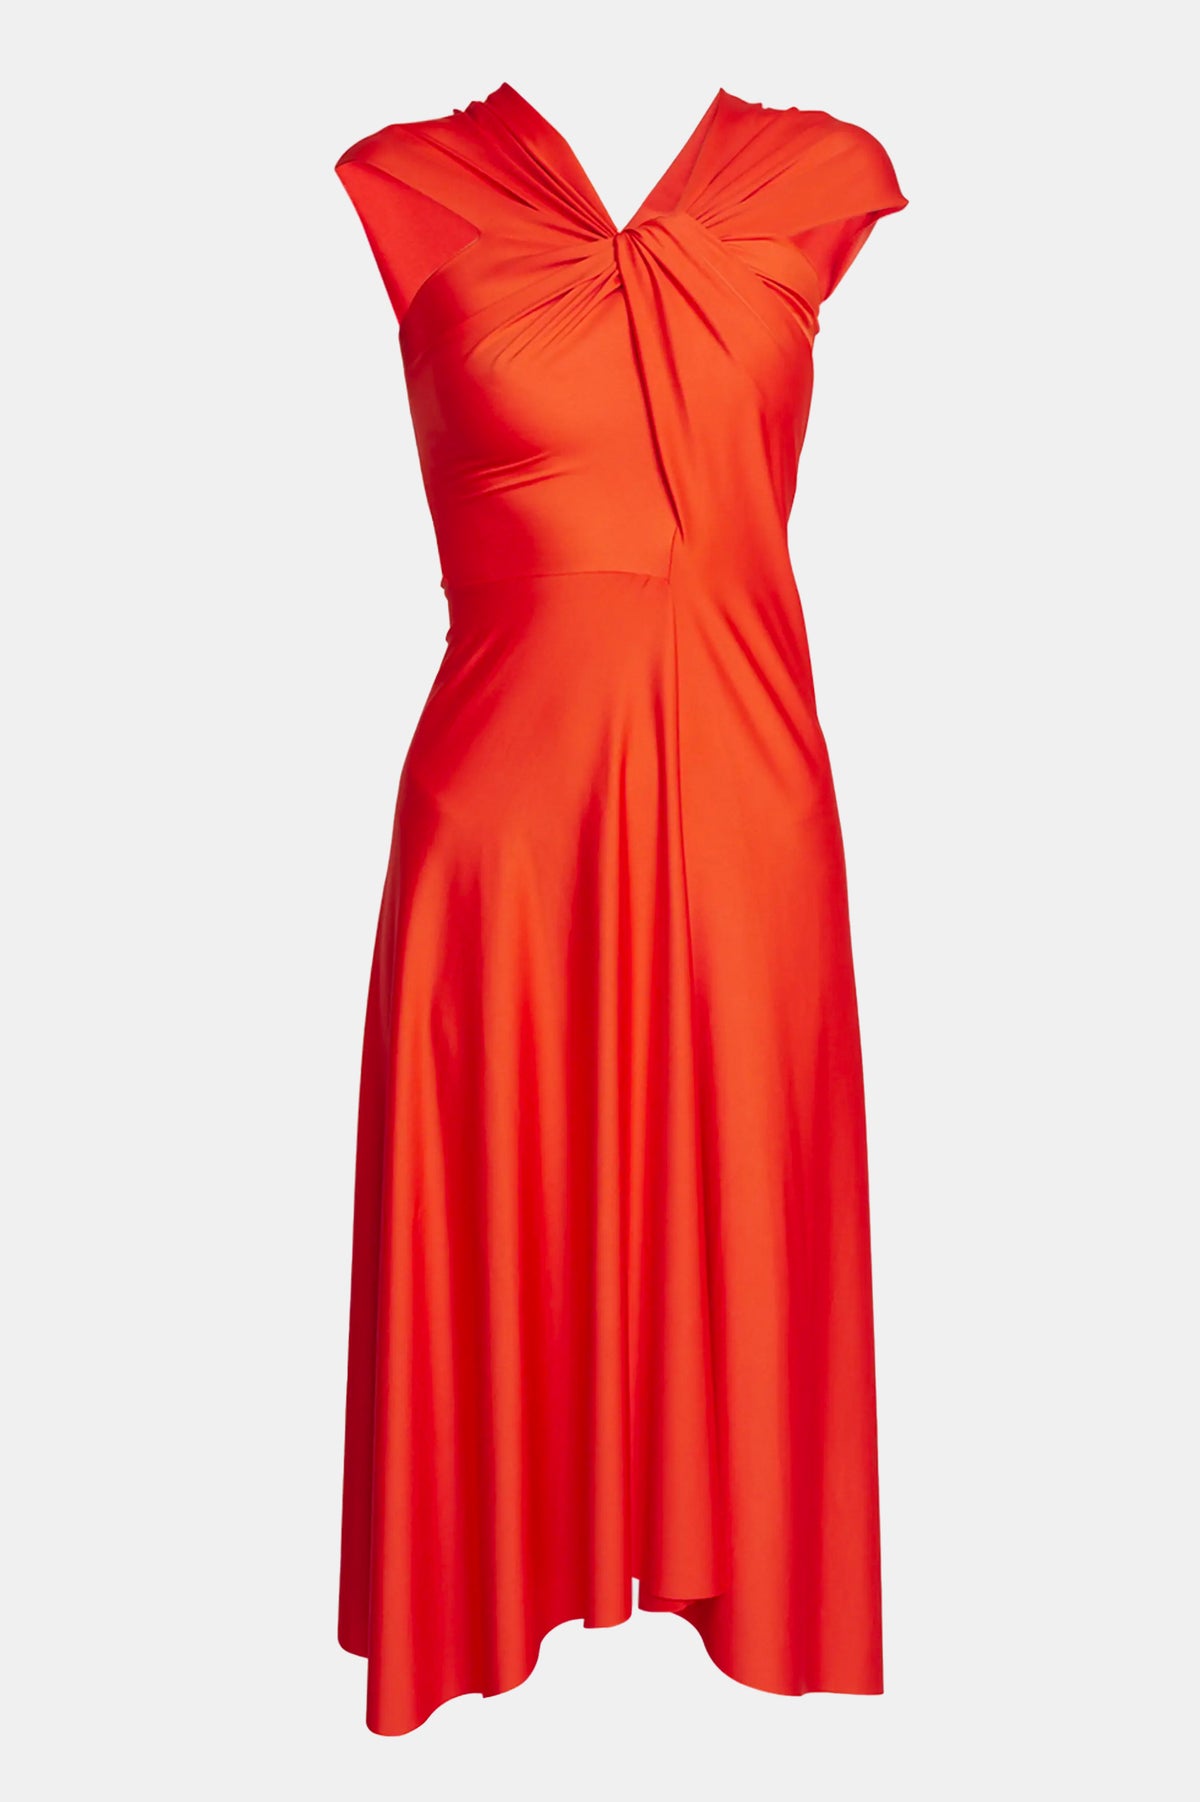 Cap Sleeve Draped Dress in Red